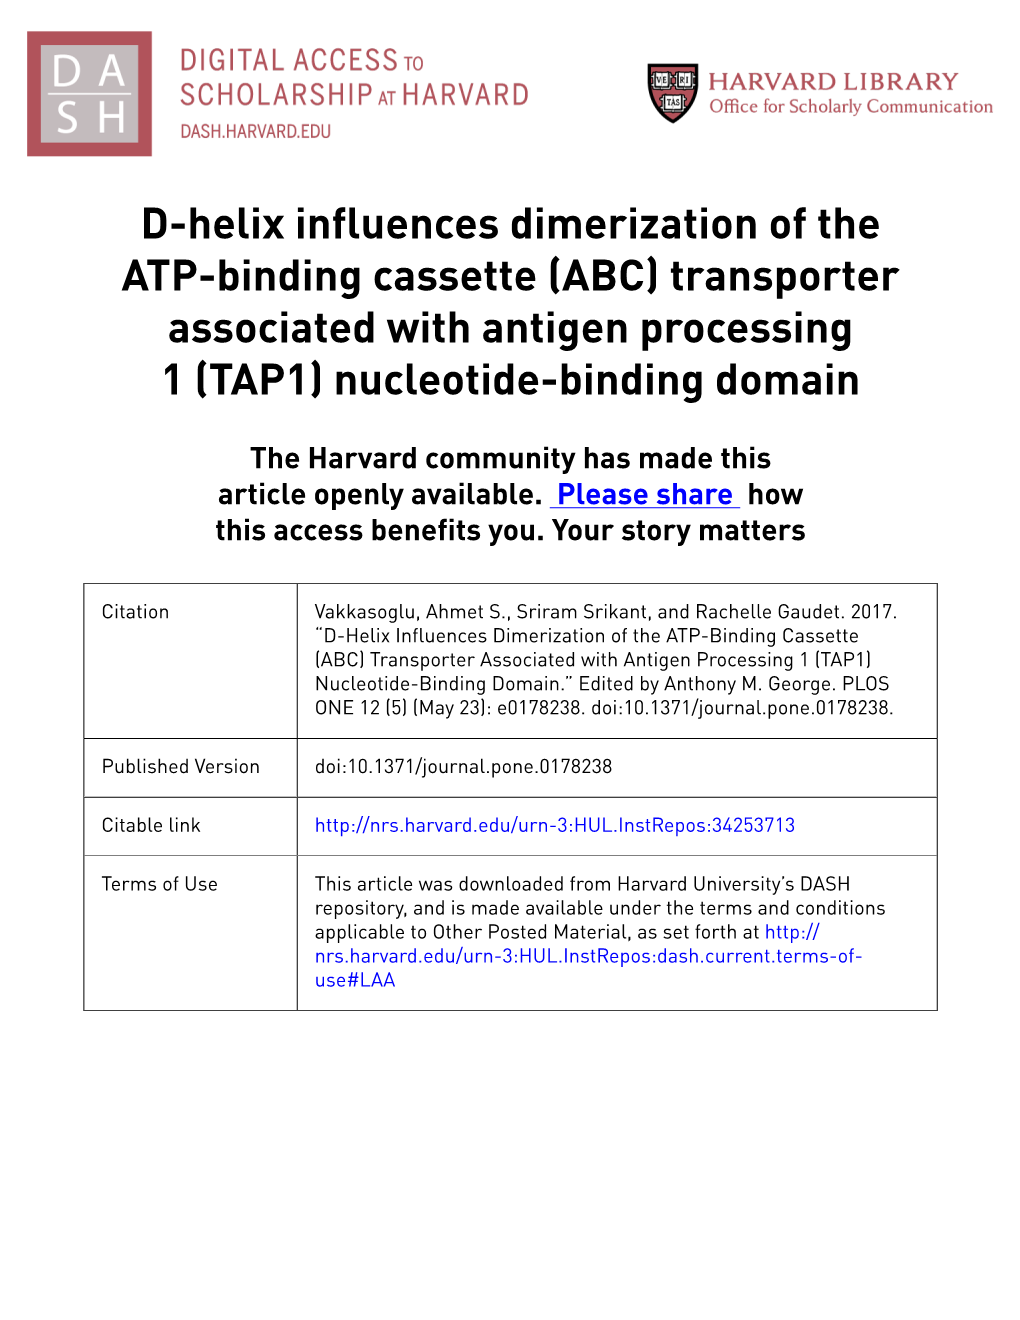 D-Helix Influences Dimerization of the ATP-Binding Cassette (ABC) Transporter Associated with Antigen Processing 1 (TAP1) Nucleotide-Binding Domain